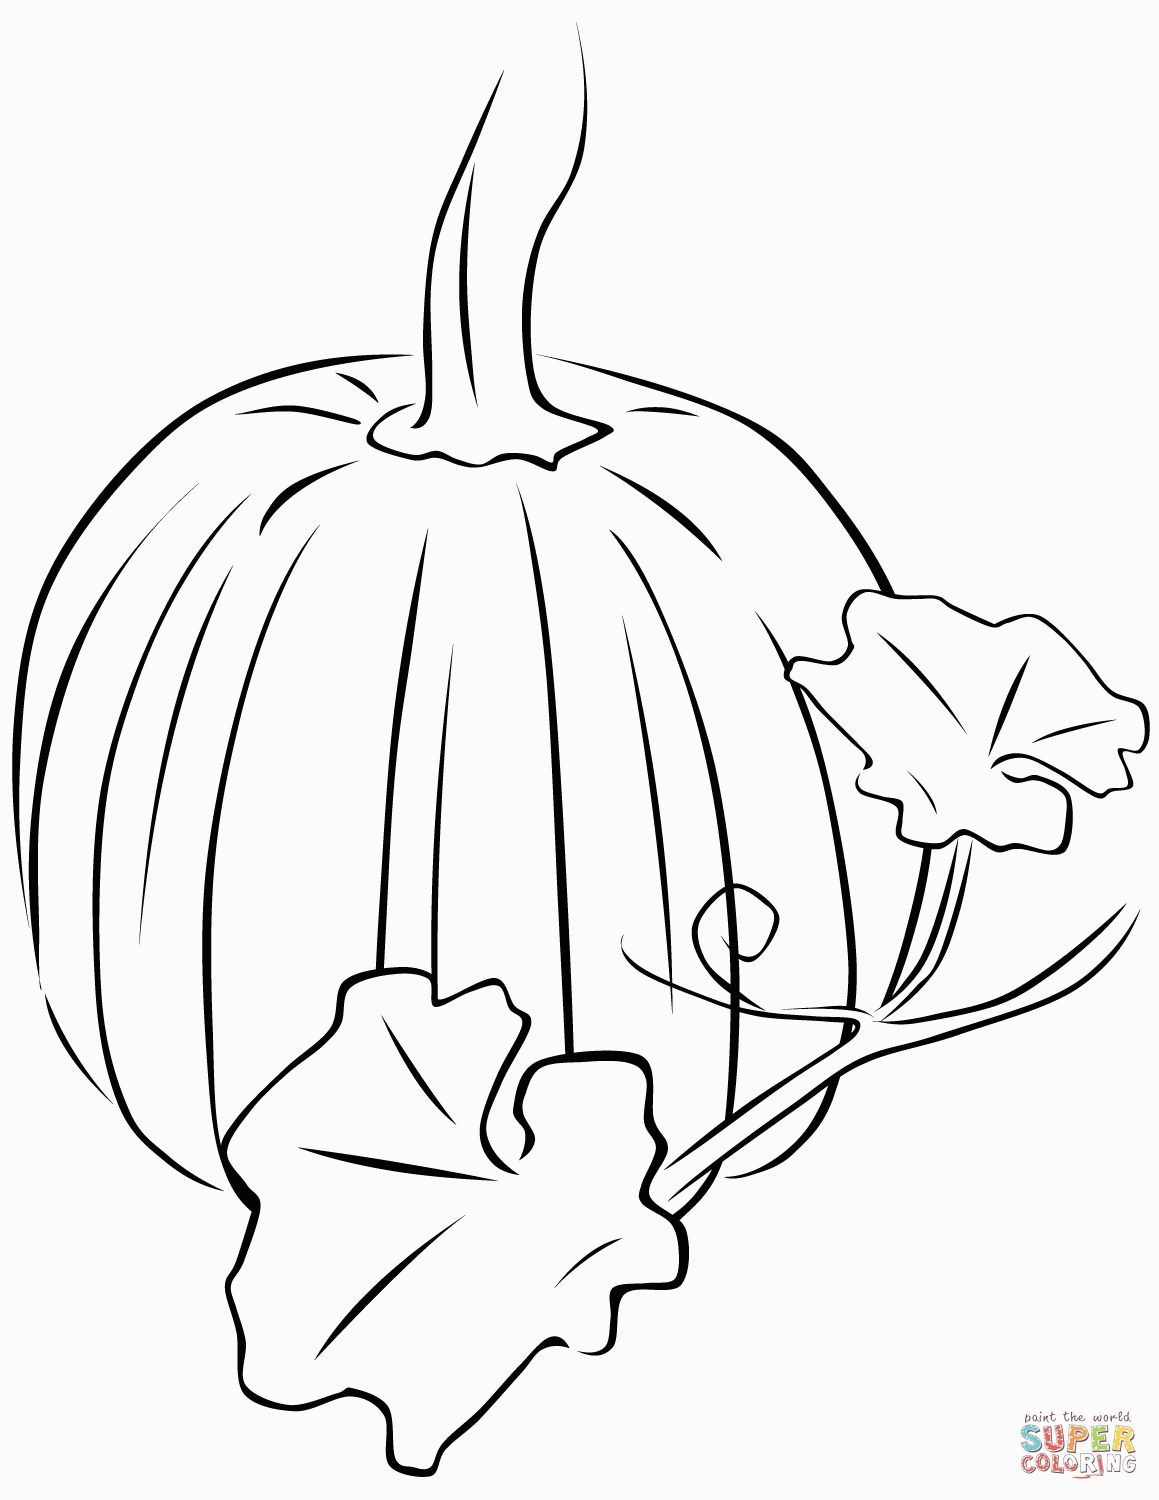 Coloring Page Of Pumpkin Pumpkin With Leaves Coloring Page For Pumpkin Coloring Sheet Get